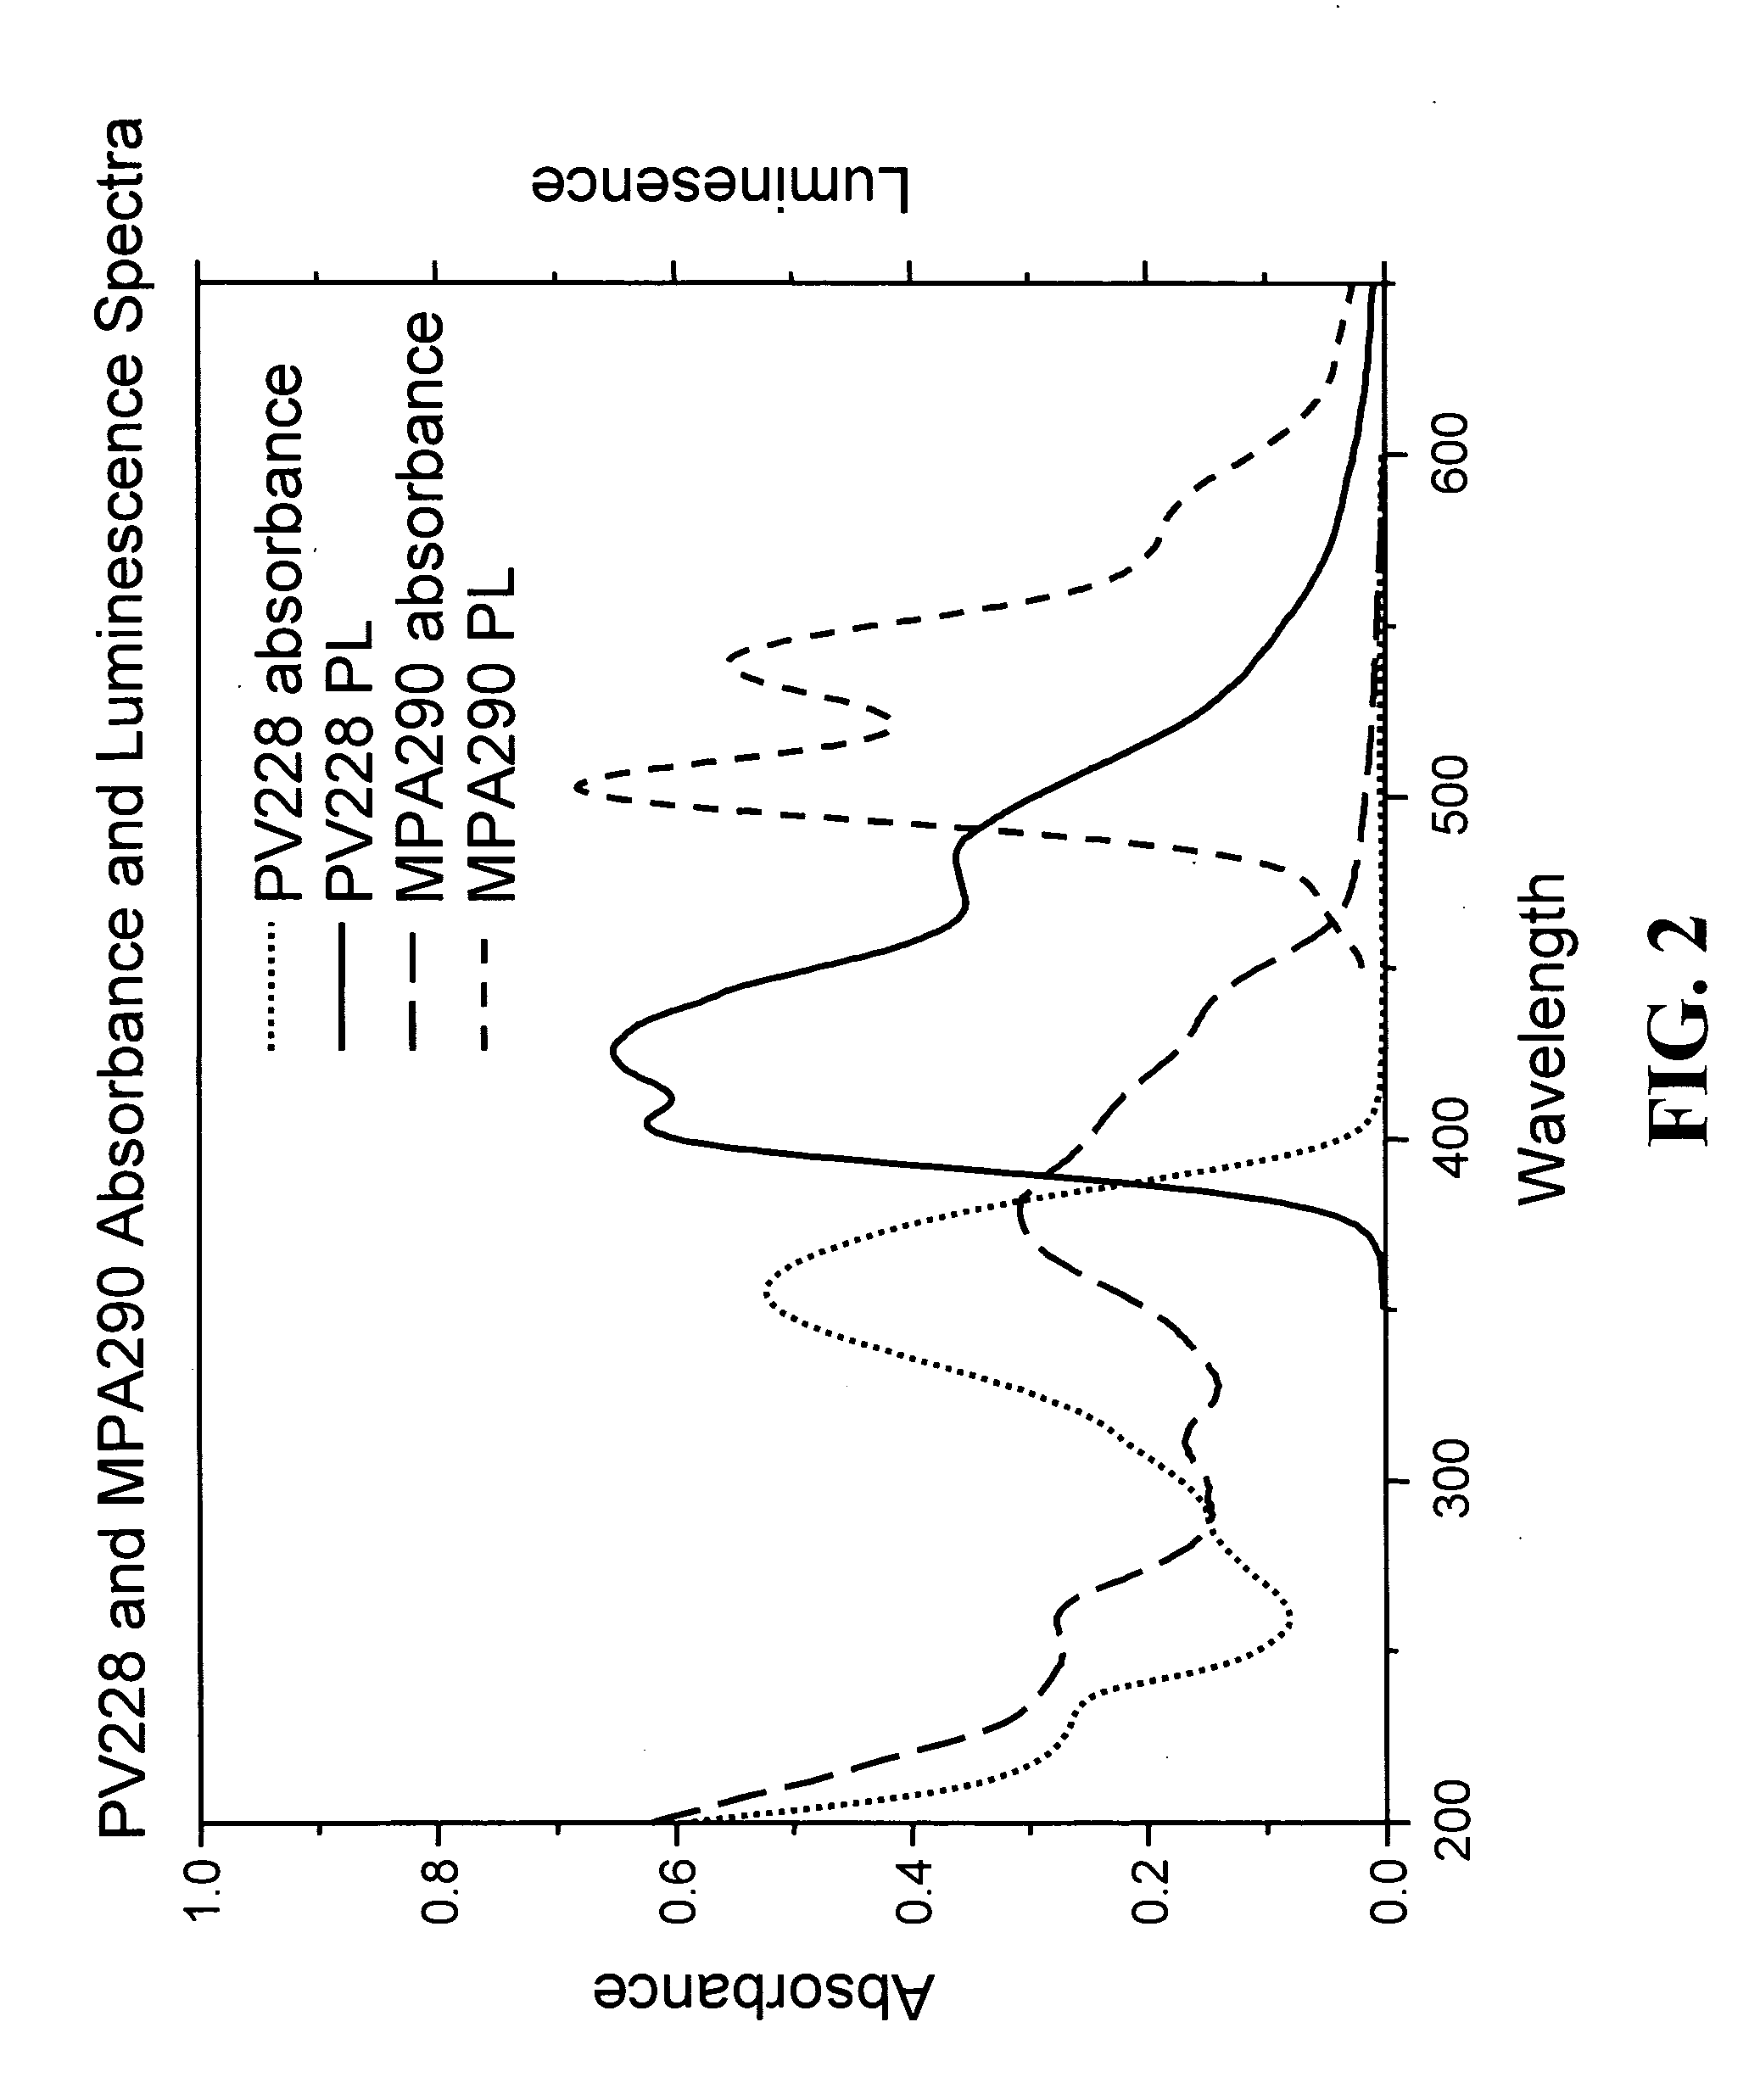 Luminescent material compositions, devices and methods of using